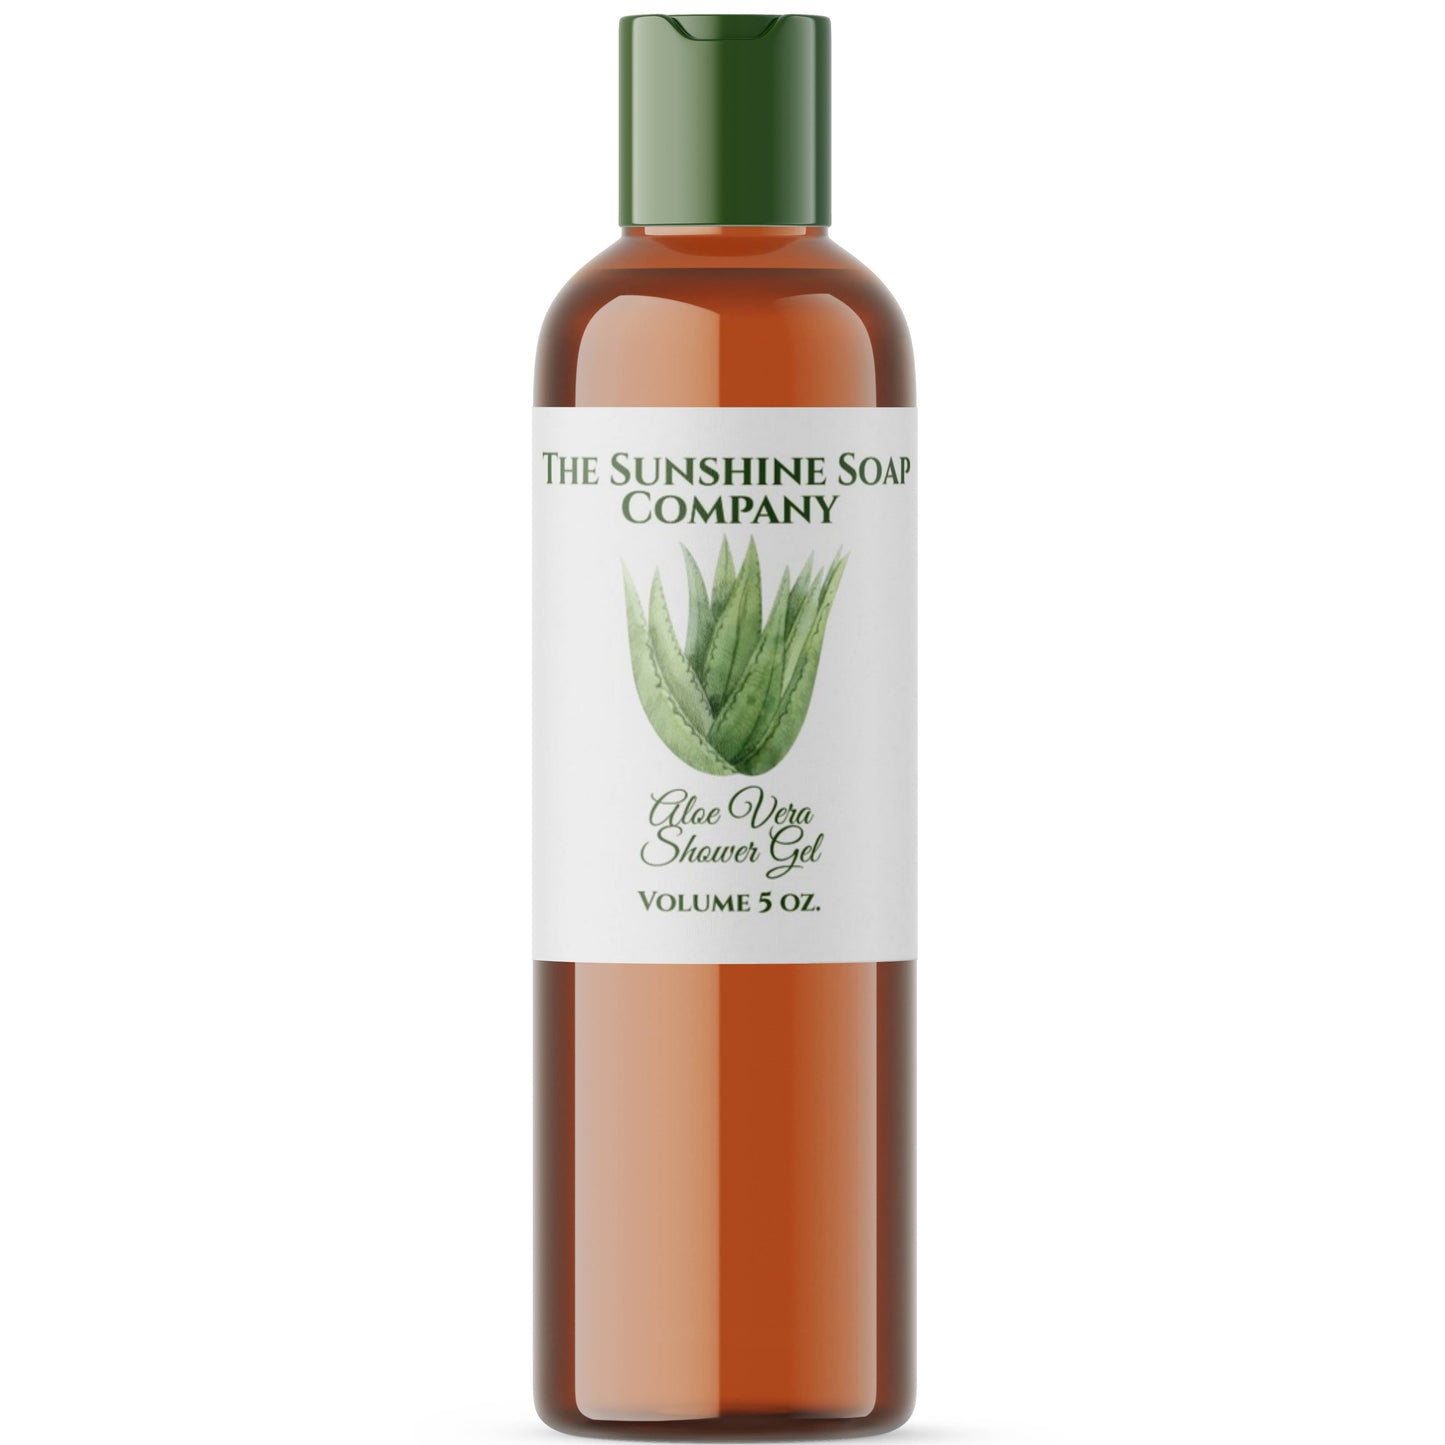 Handmade Soap and Cosmetics Product Packaging Label - aloe vera - rectangle - 3.75" x 2"